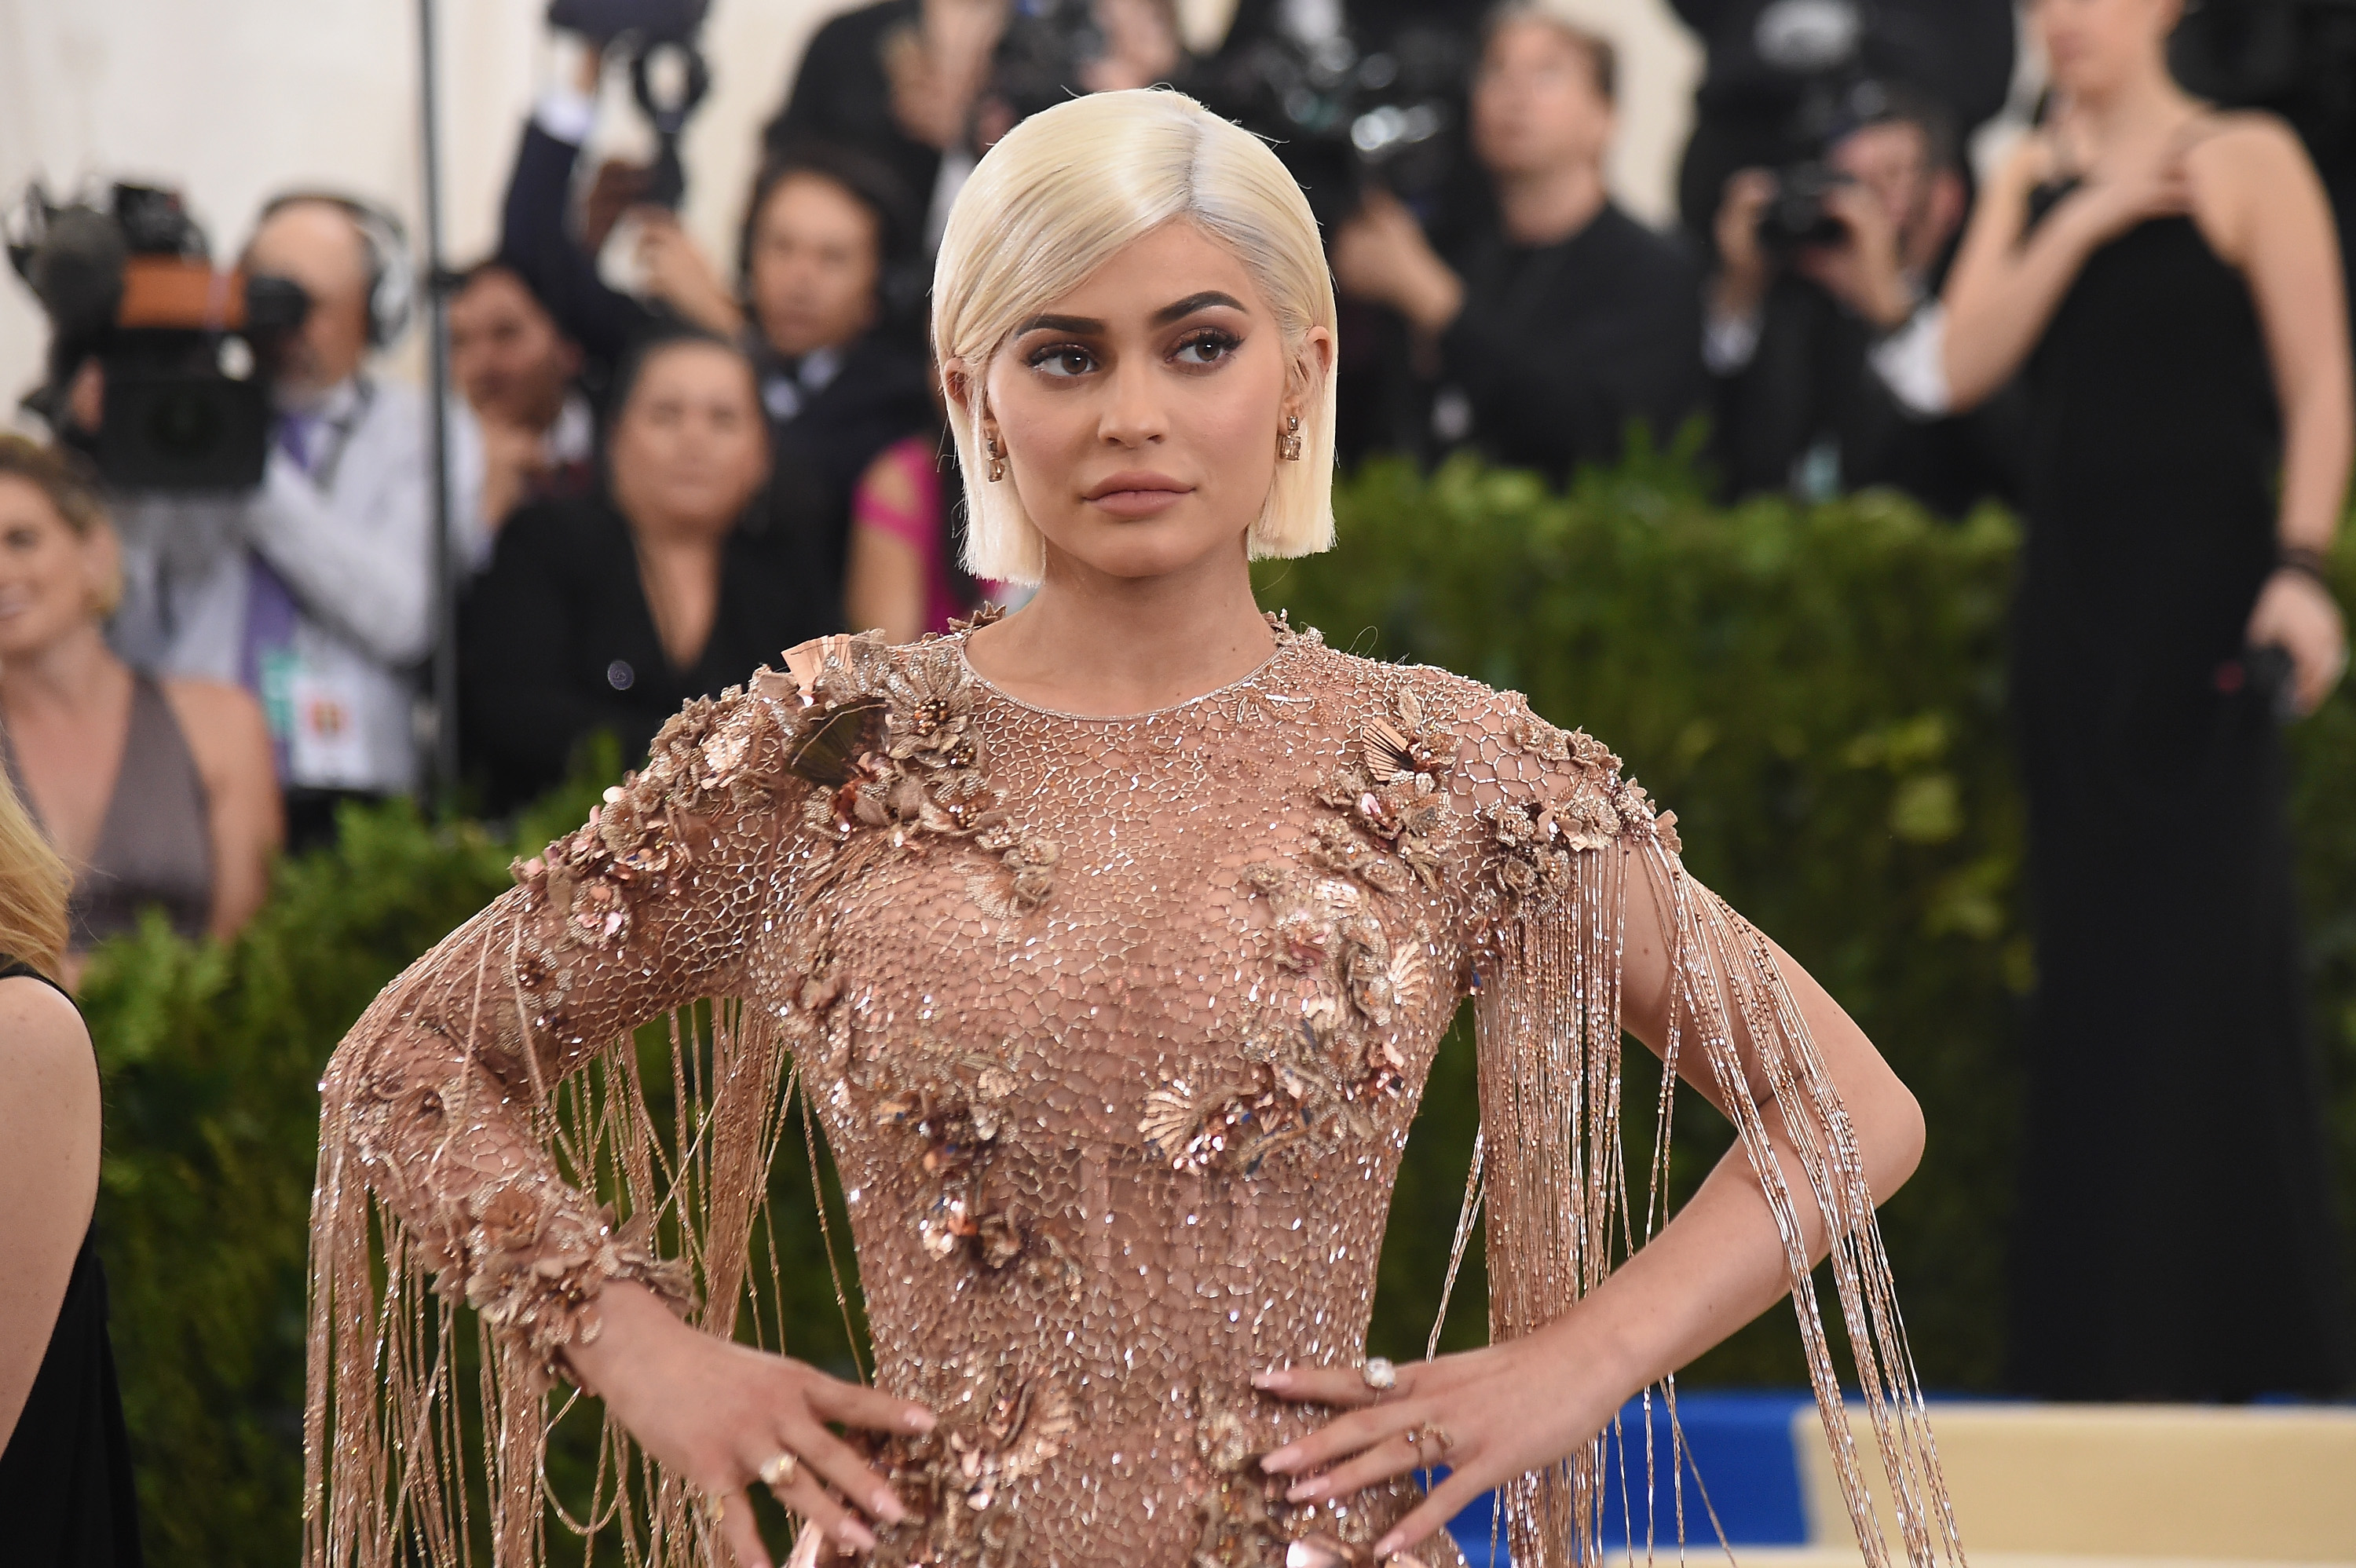 Kylie Jenner Net Worth 5 Fast Facts You Need to Know